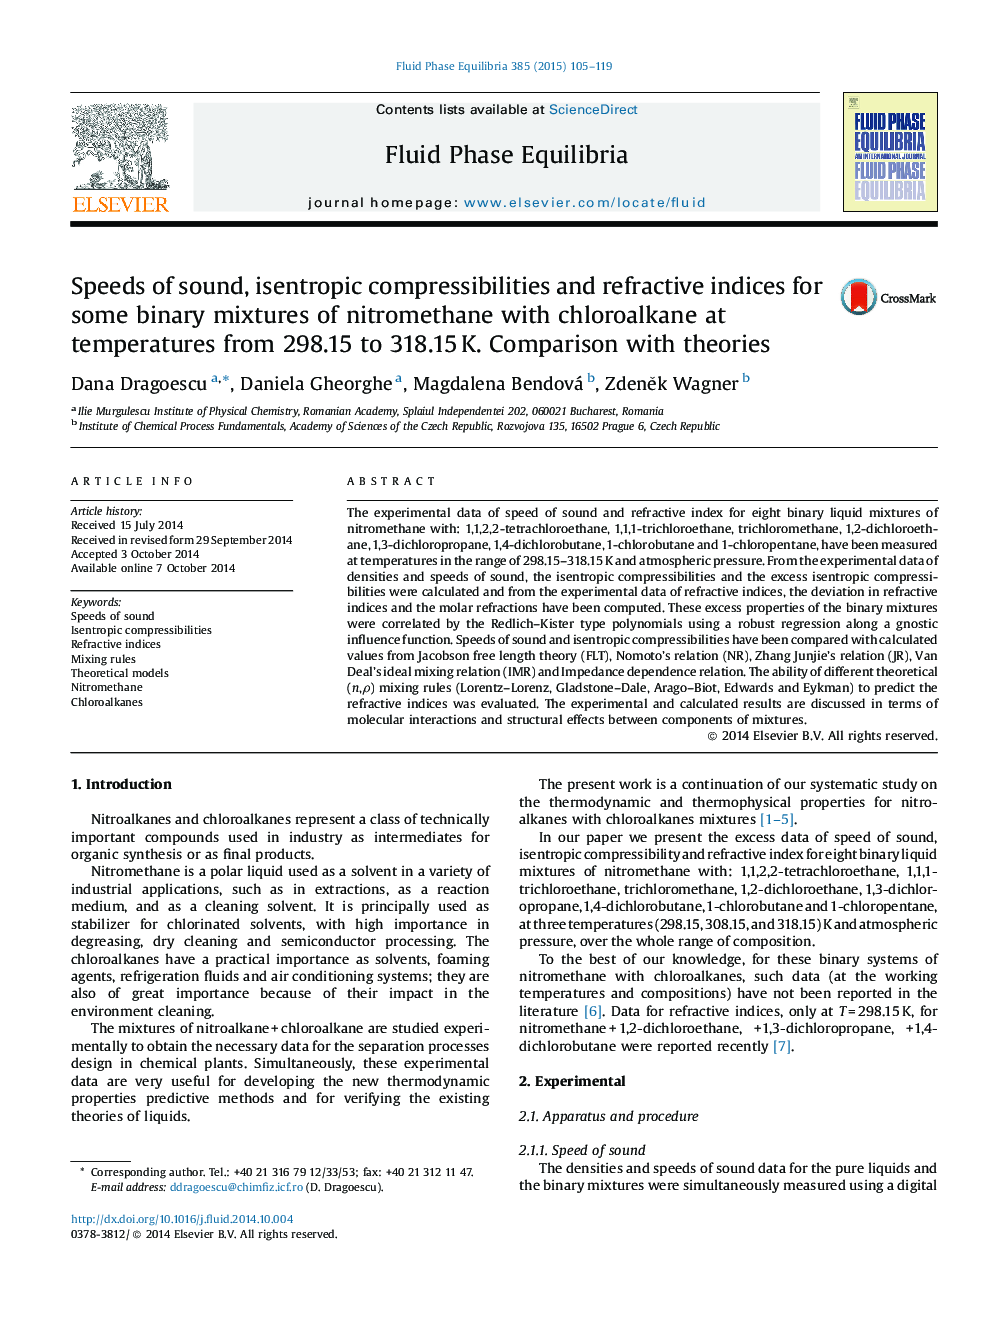 Speeds of sound, isentropic compressibilities and refractive indices for some binary mixtures of nitromethane with chloroalkane at temperatures from 298.15 to 318.15 K. Comparison with theories